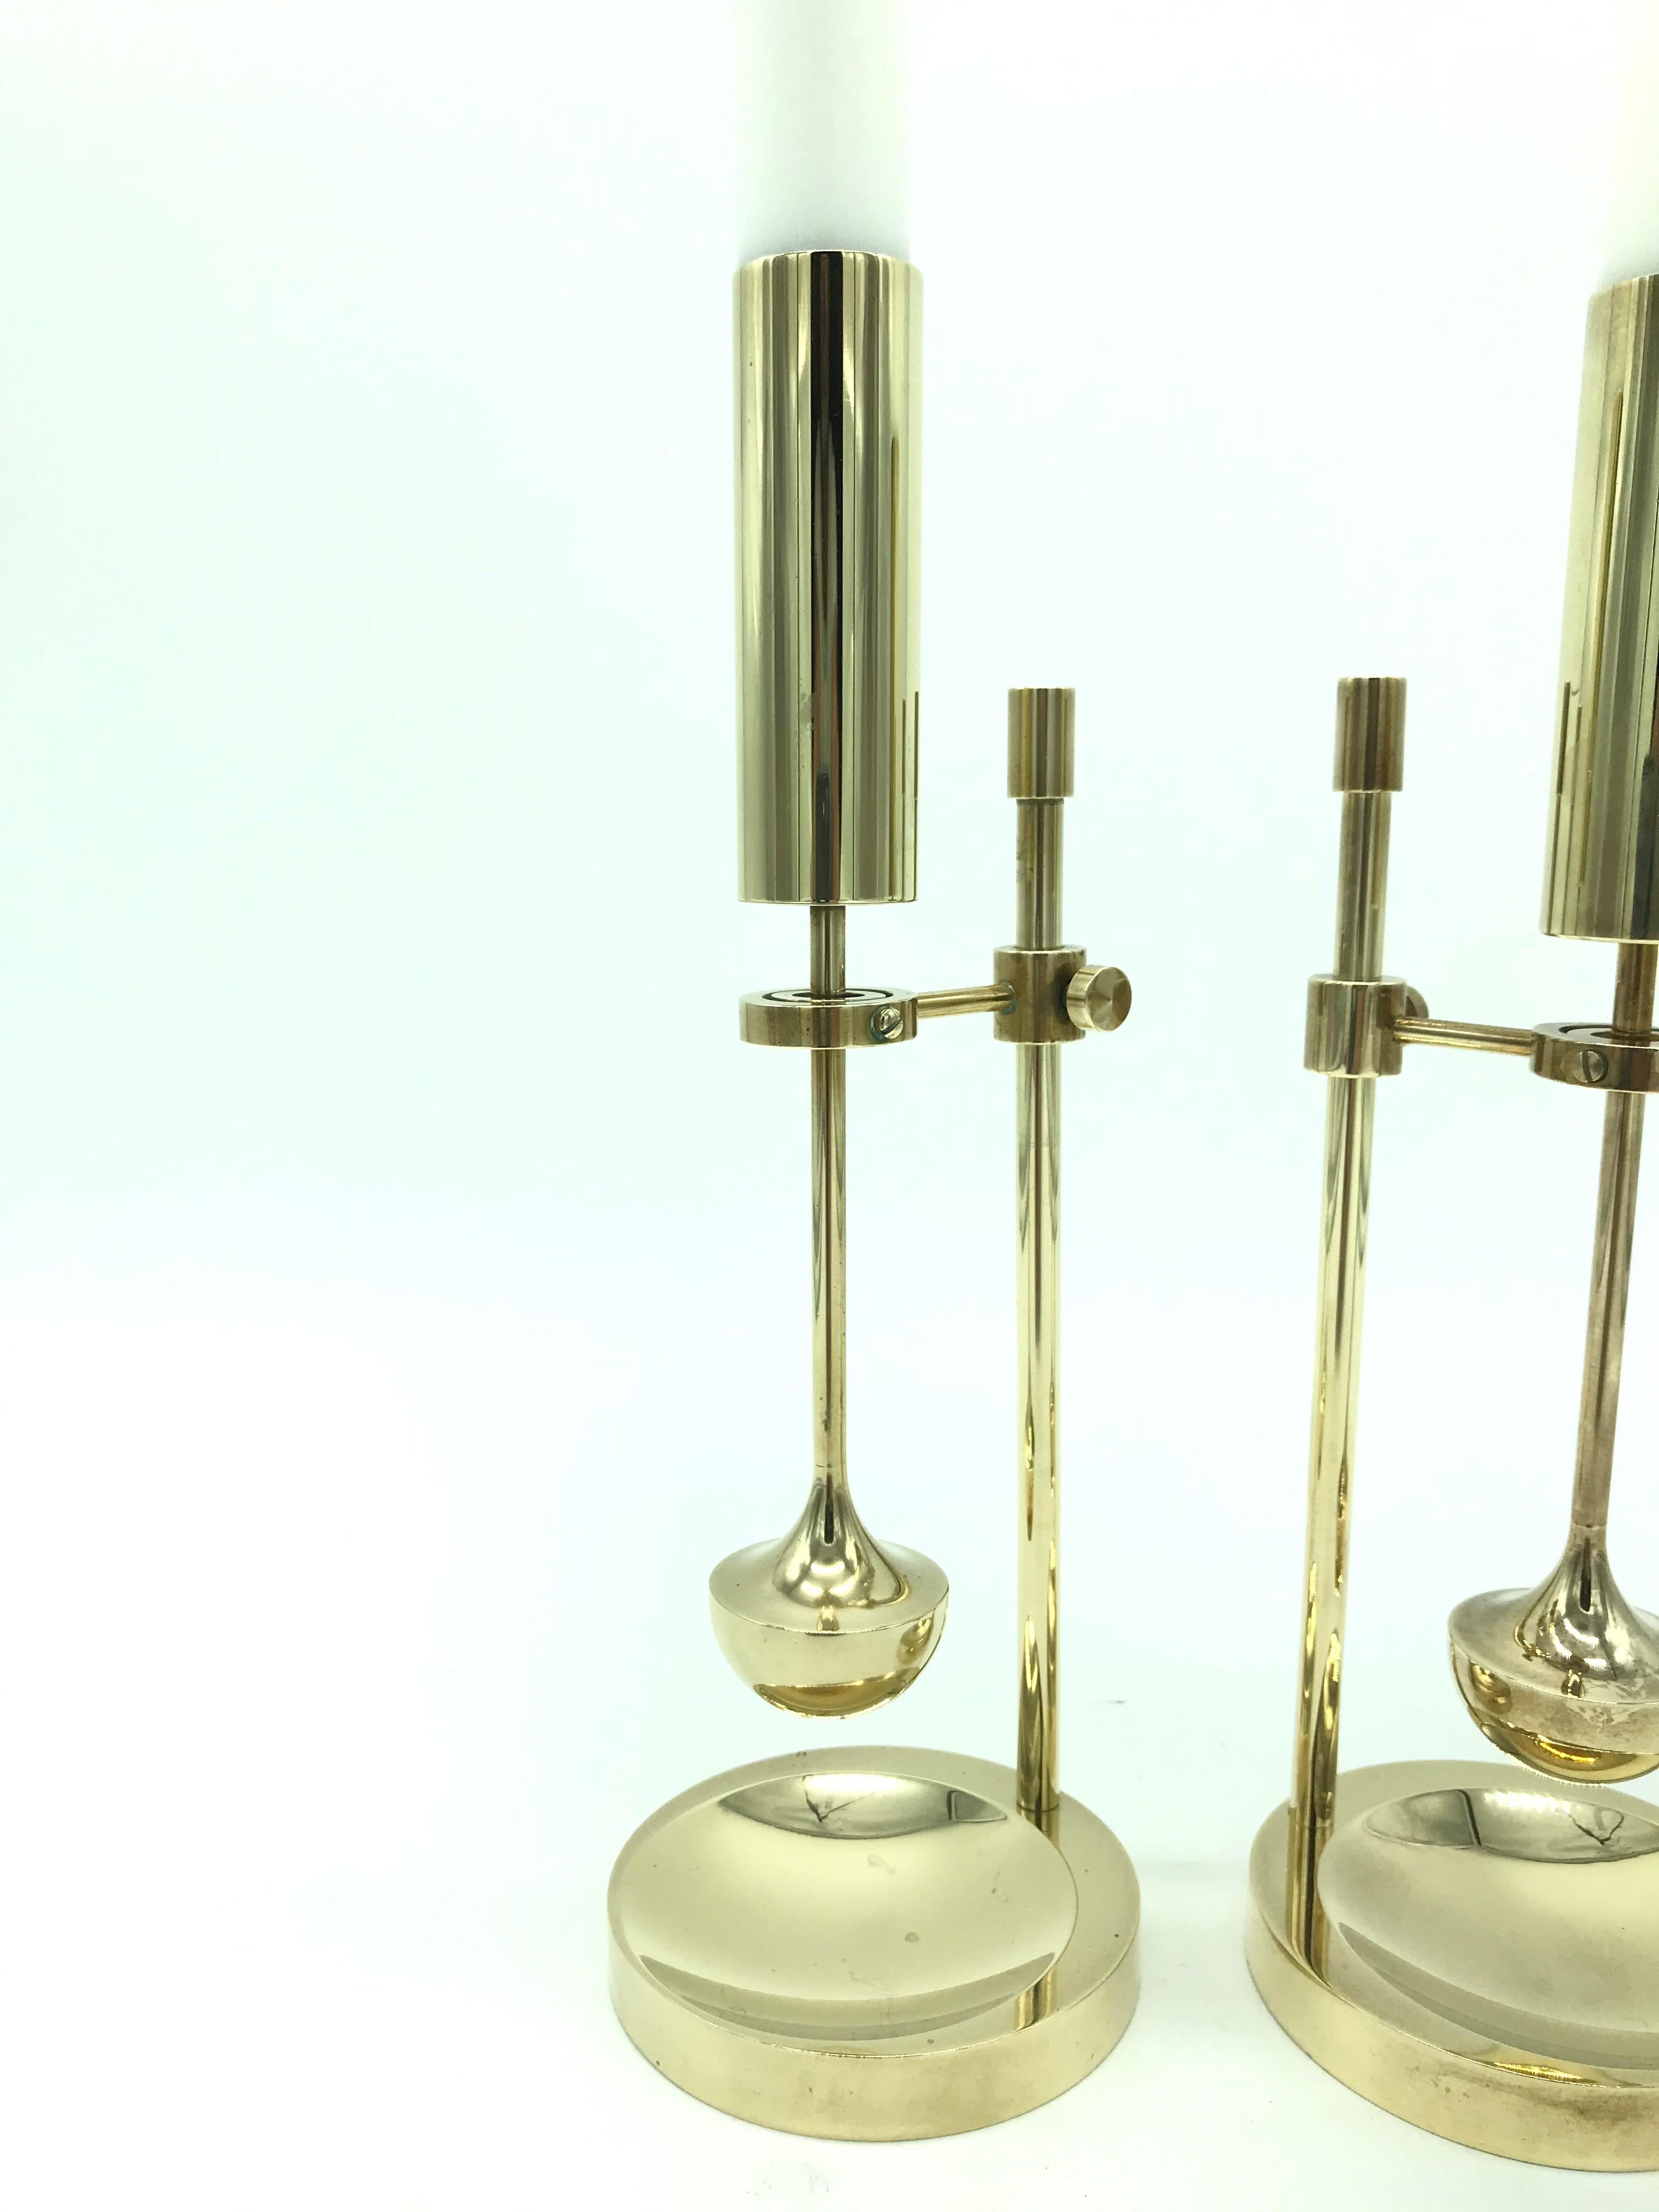 Vintage midcentury candleholders by Ilse Ammonsen for Daproma, Denmark
These were originally oil lamps but are missing the top that holds the wick.
They make great candleholders and use standard Ikea candles.




 